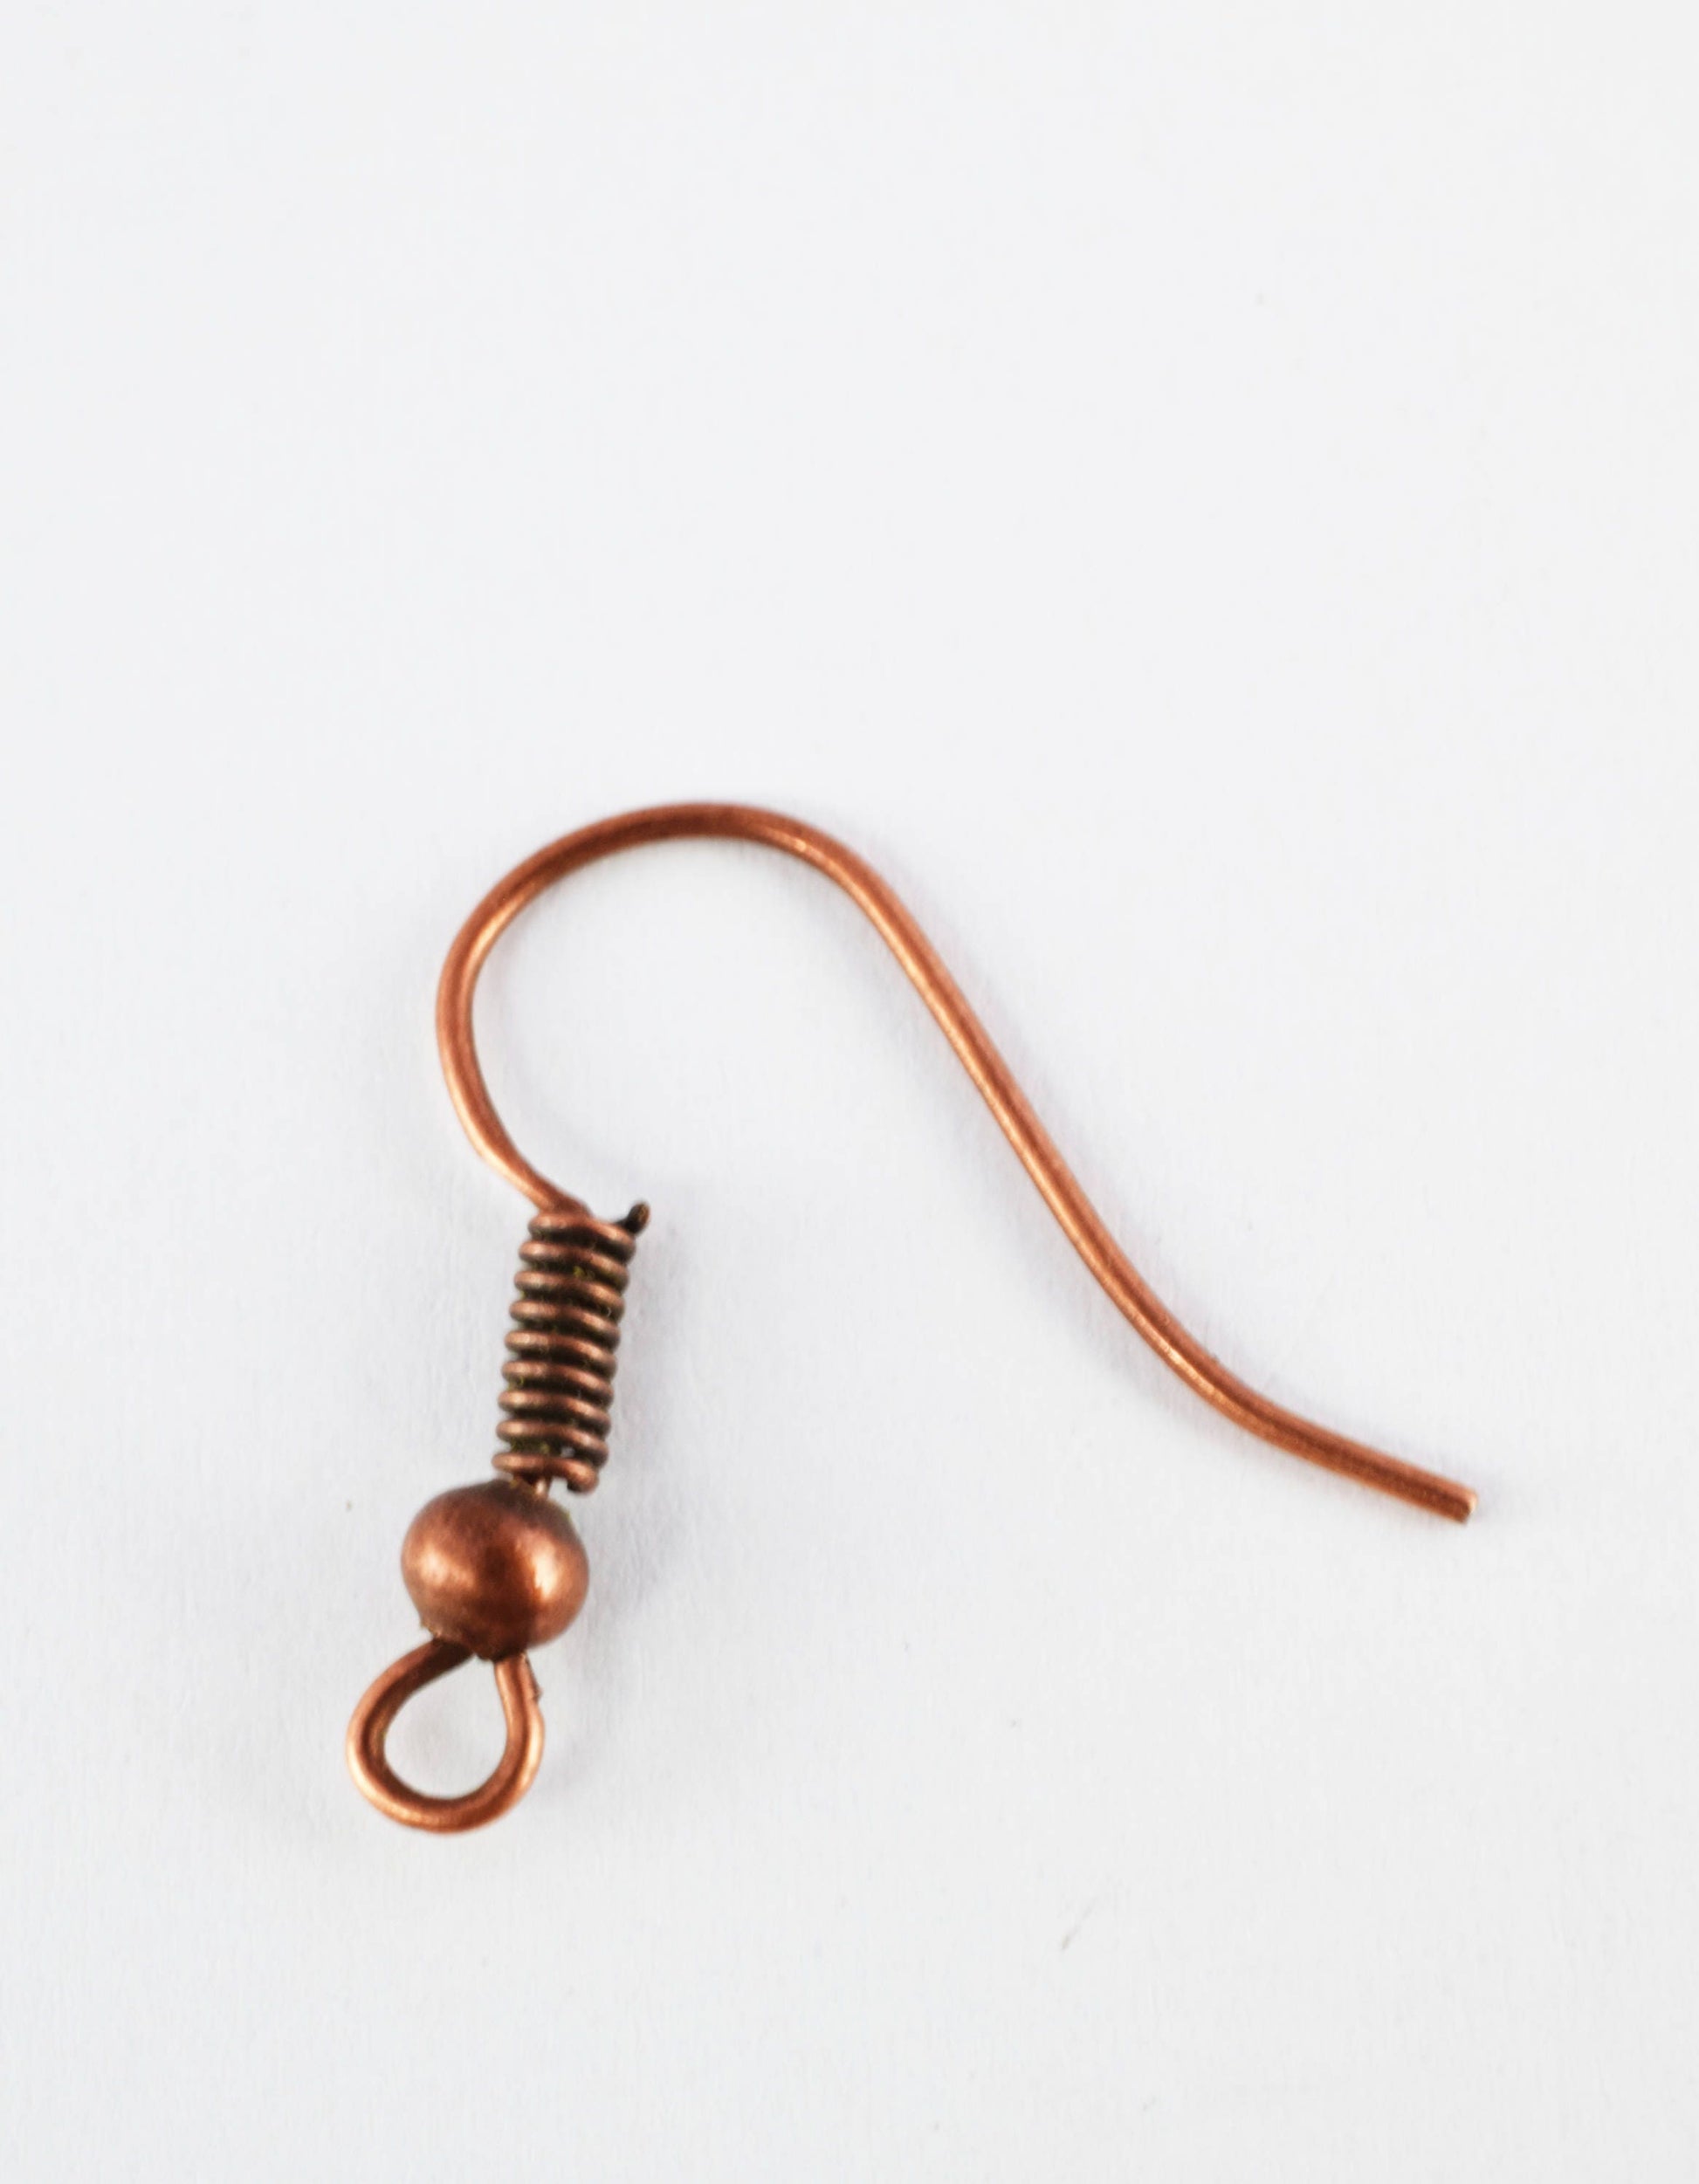 100 PCs Earring Wire coil Findings Fish hook Gun Metal/Antique Copper/Antique Brass/Gold Plated Earring Wire,Jewelry Supplier and wholesale